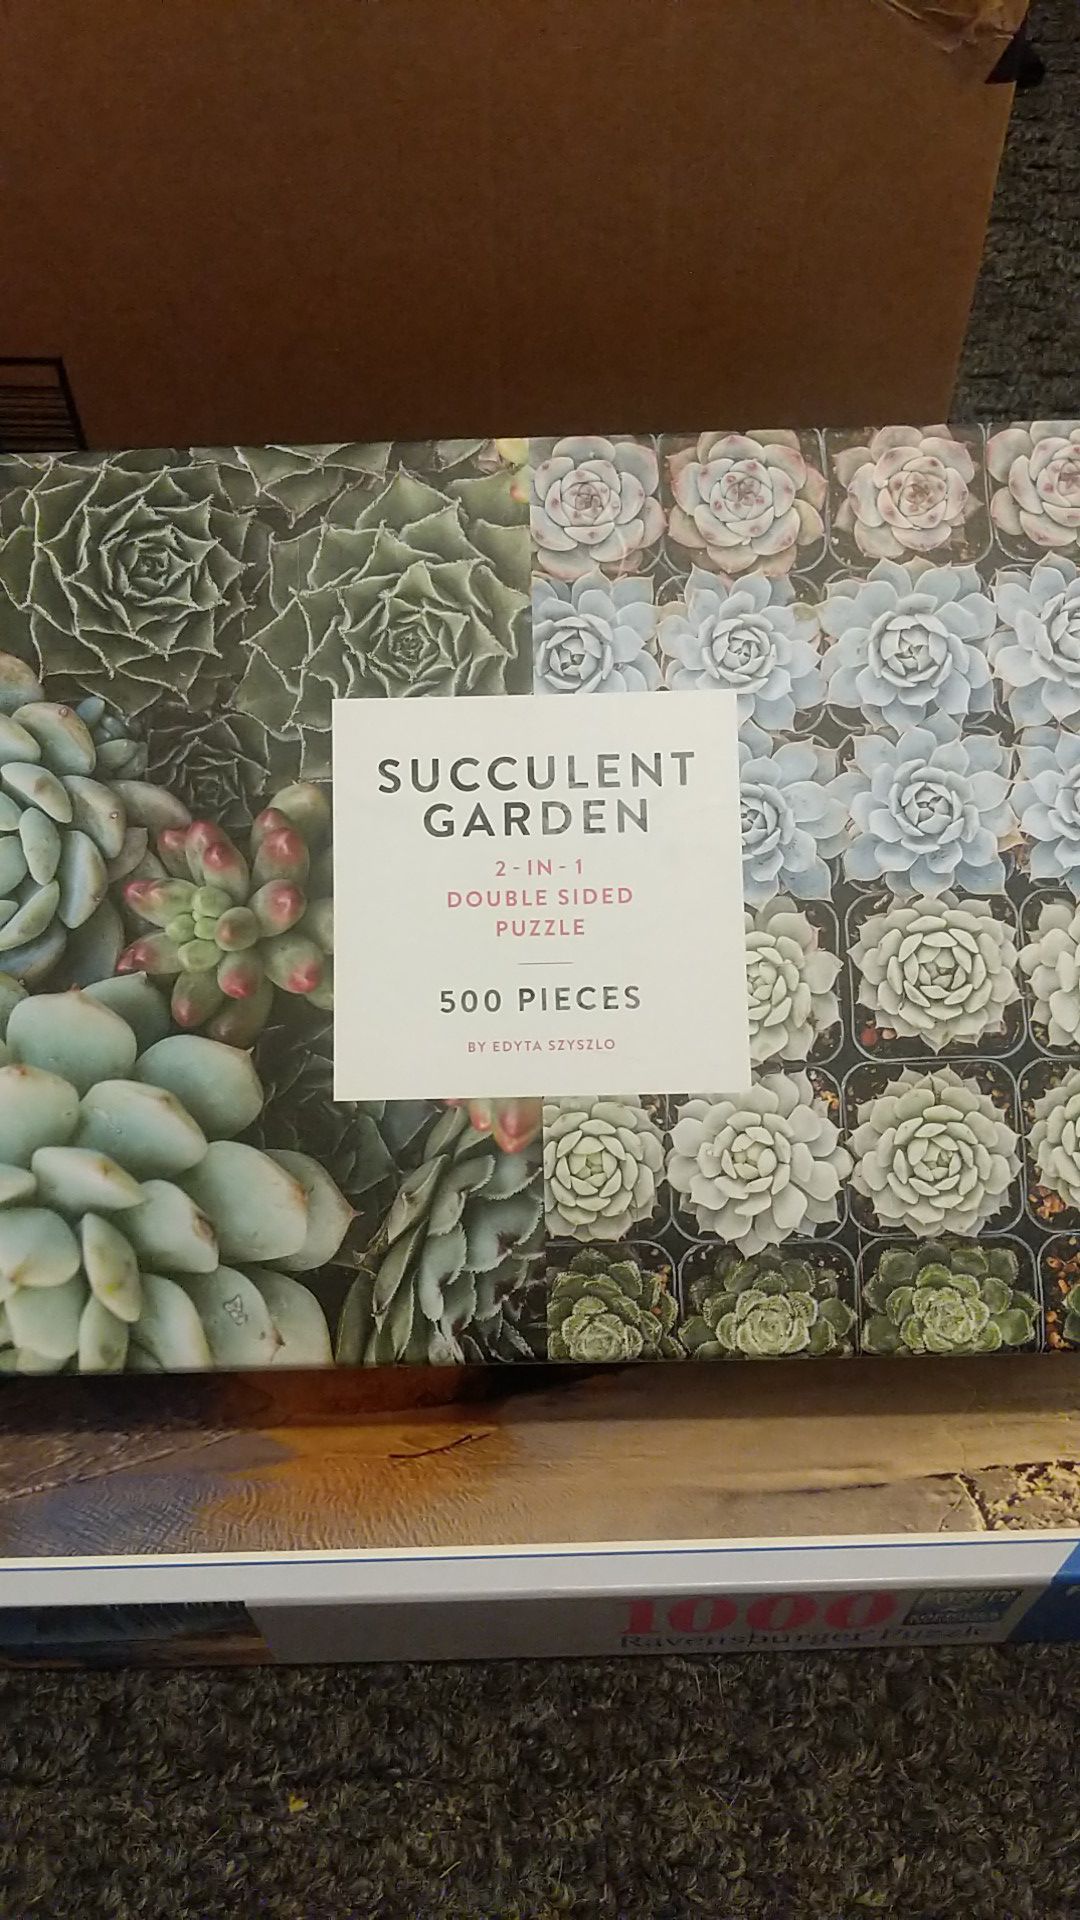 Succulent garden two in one double-sided puzzle